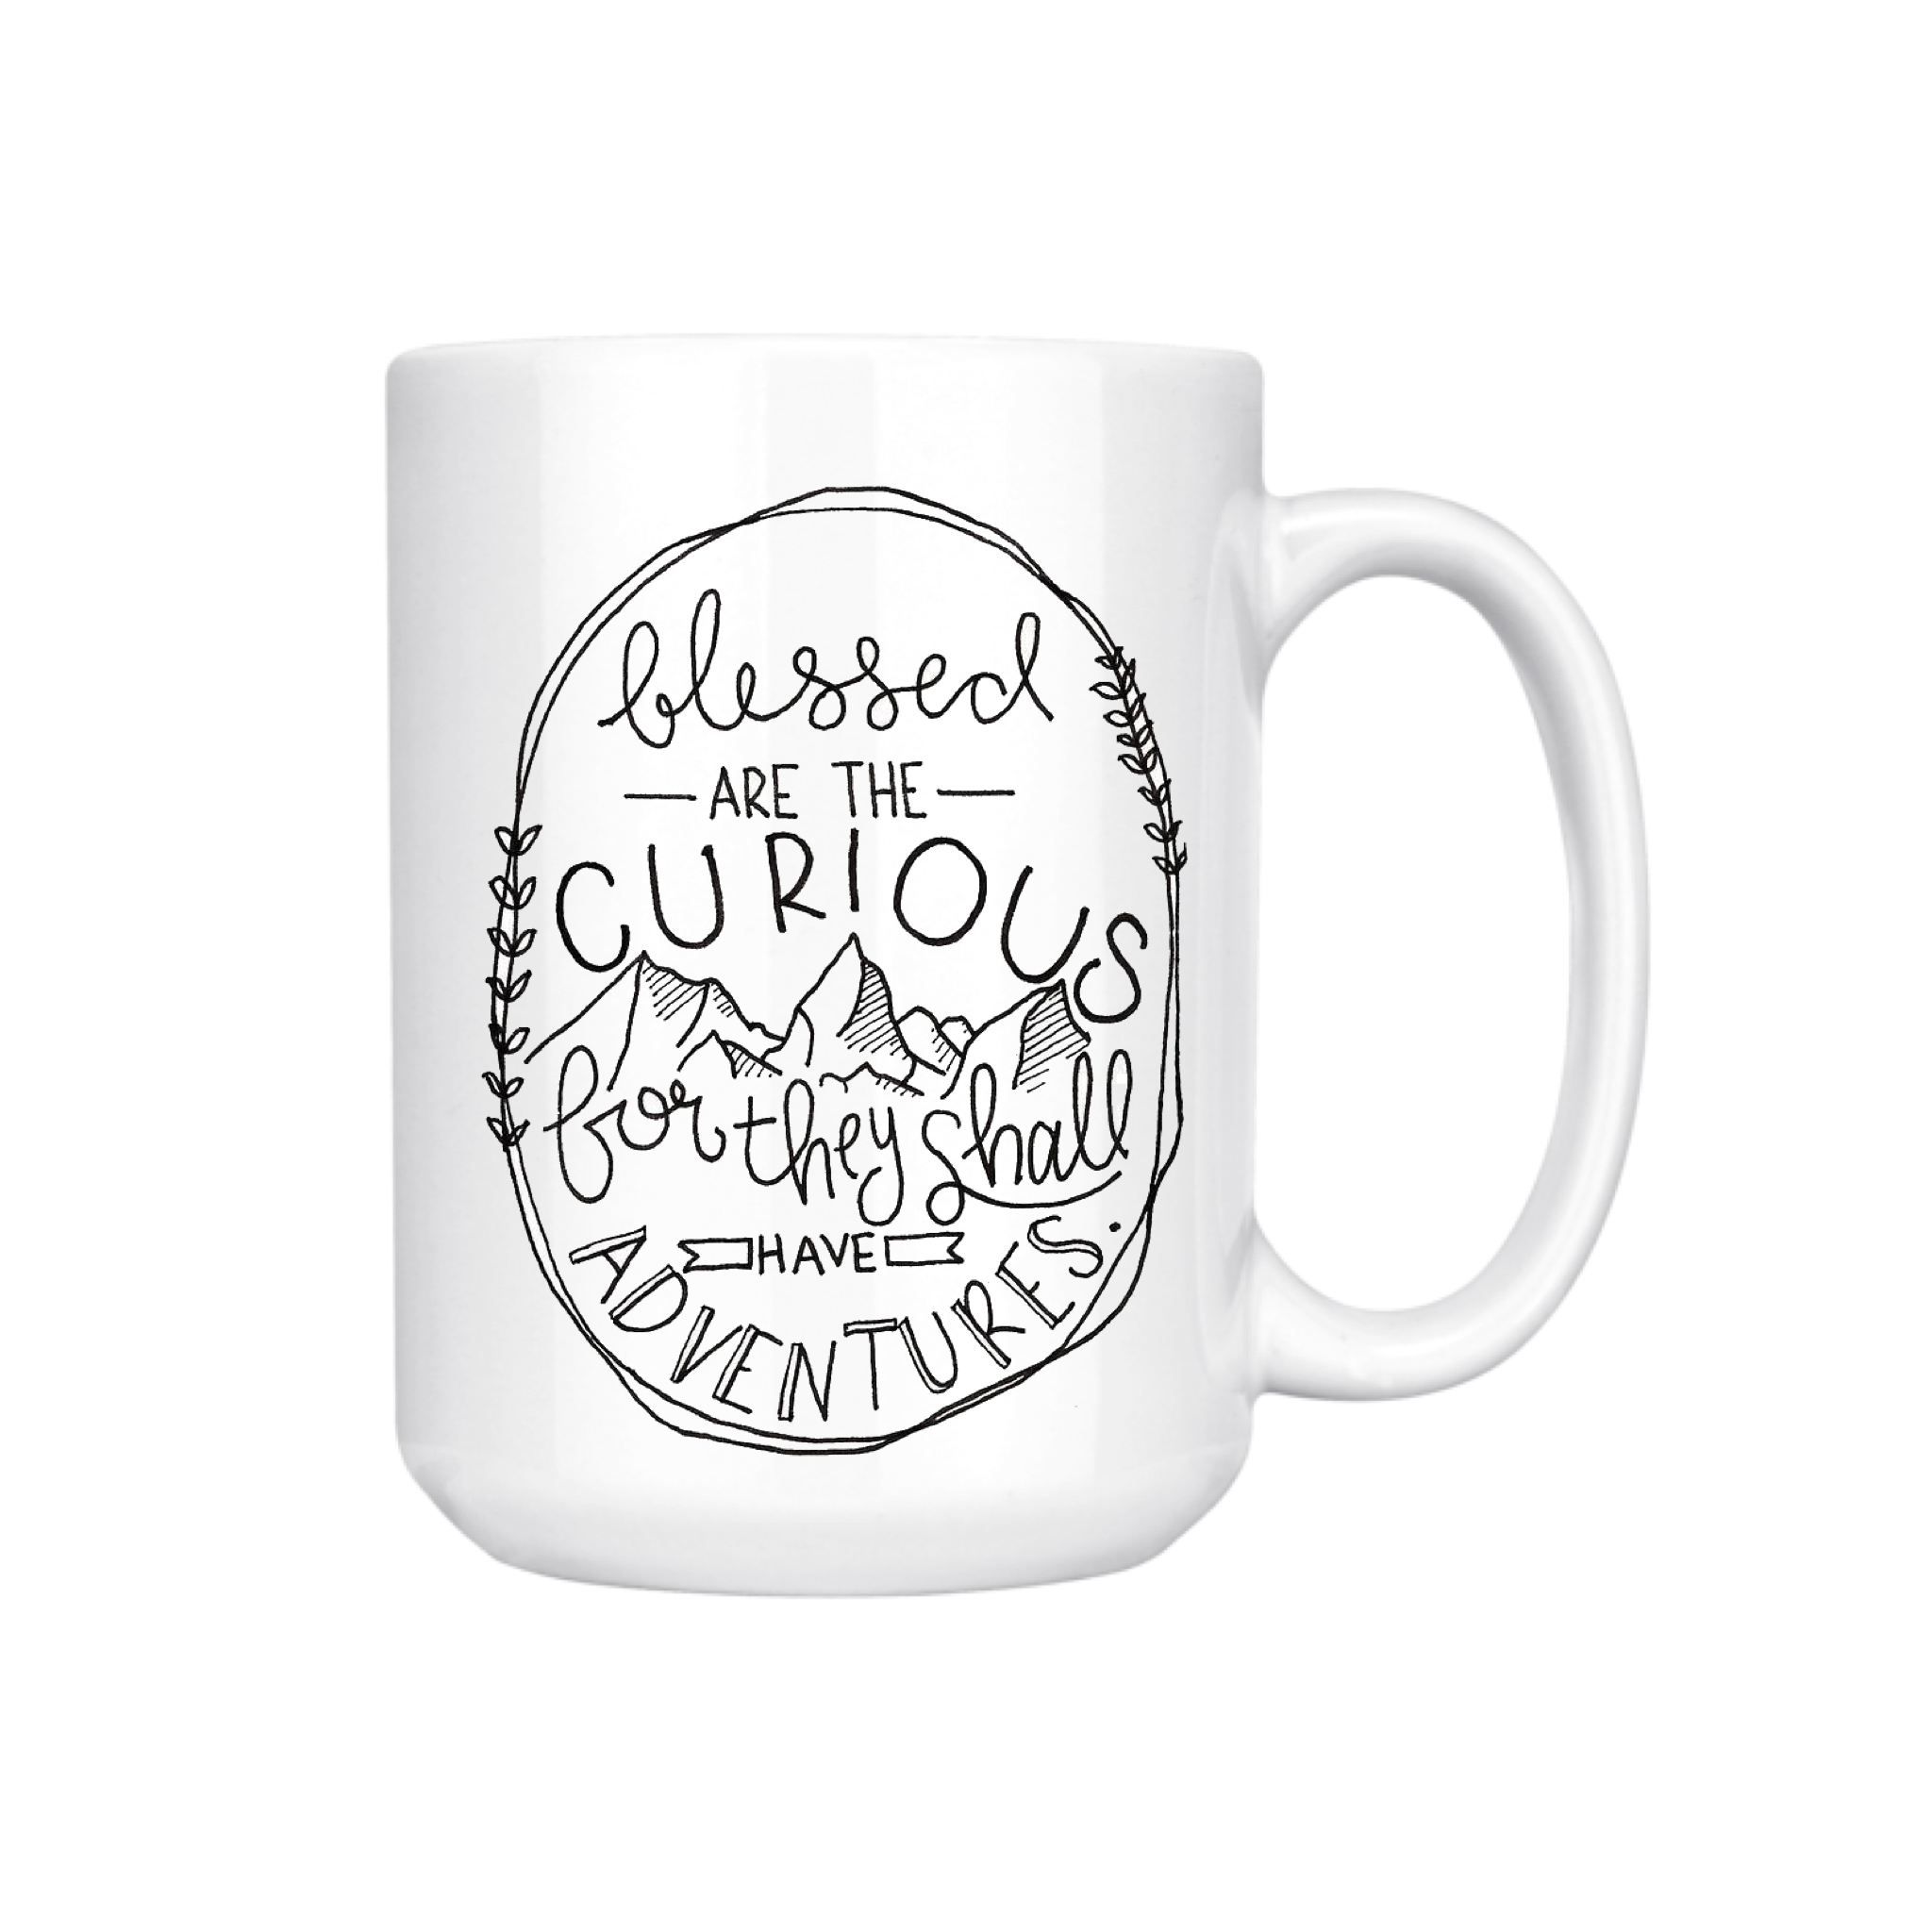 BLESSED ARE THE CURIOUS MUG